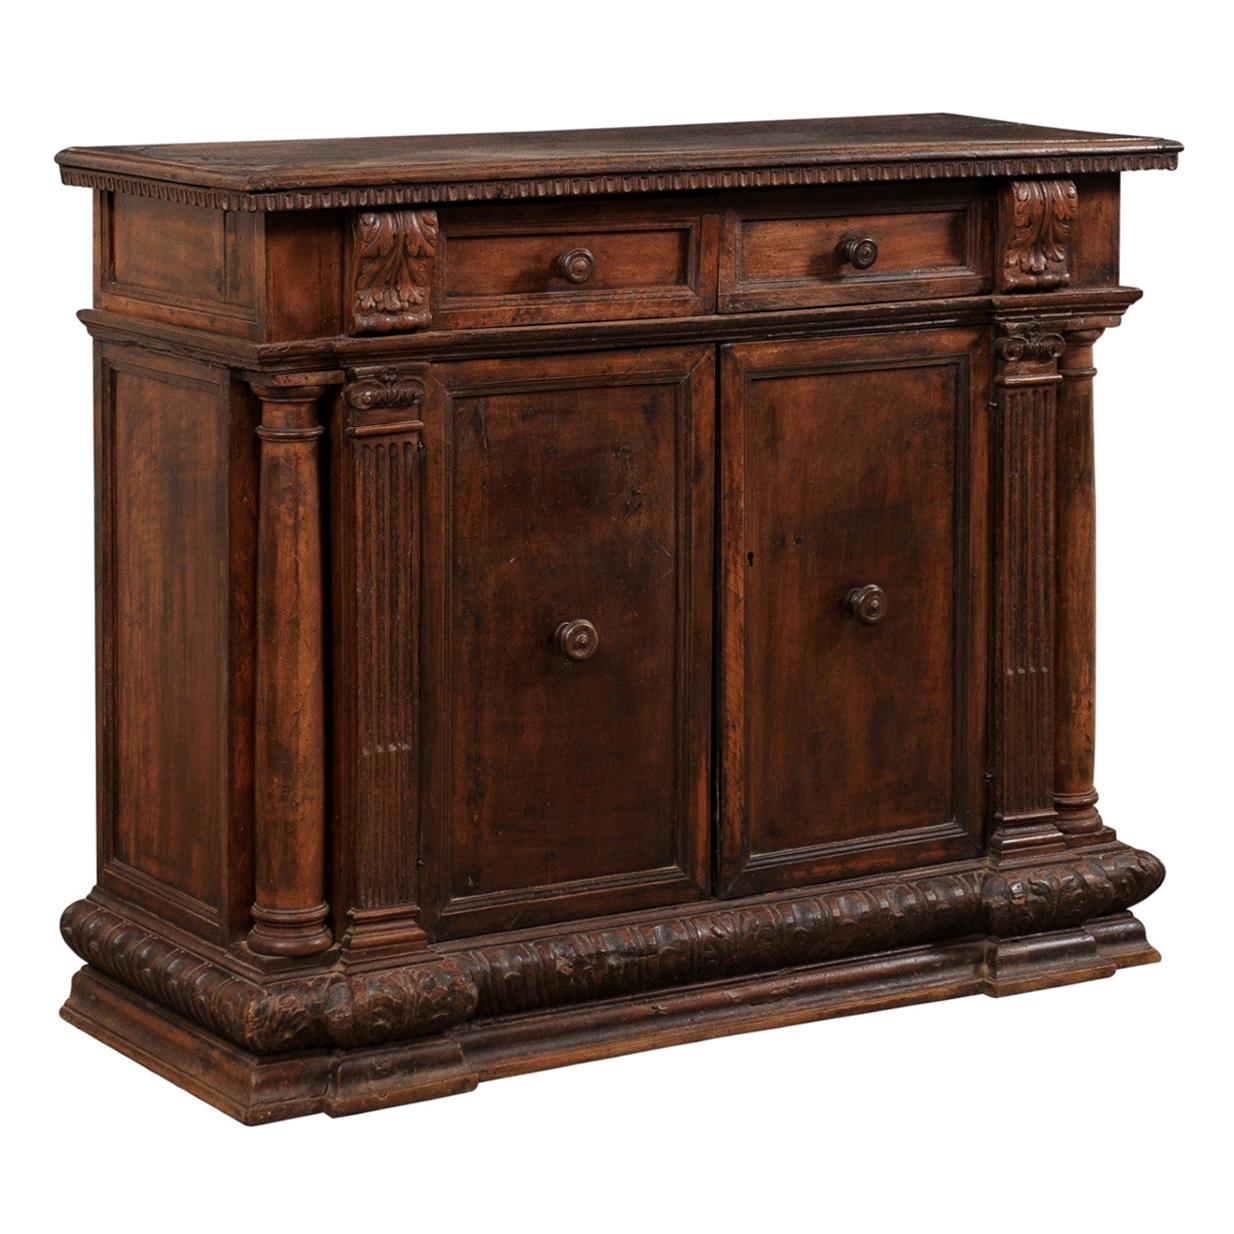 Italian Early 19th C. Walnut Cabinet with Carved Column & Pilaster Accents For Sale